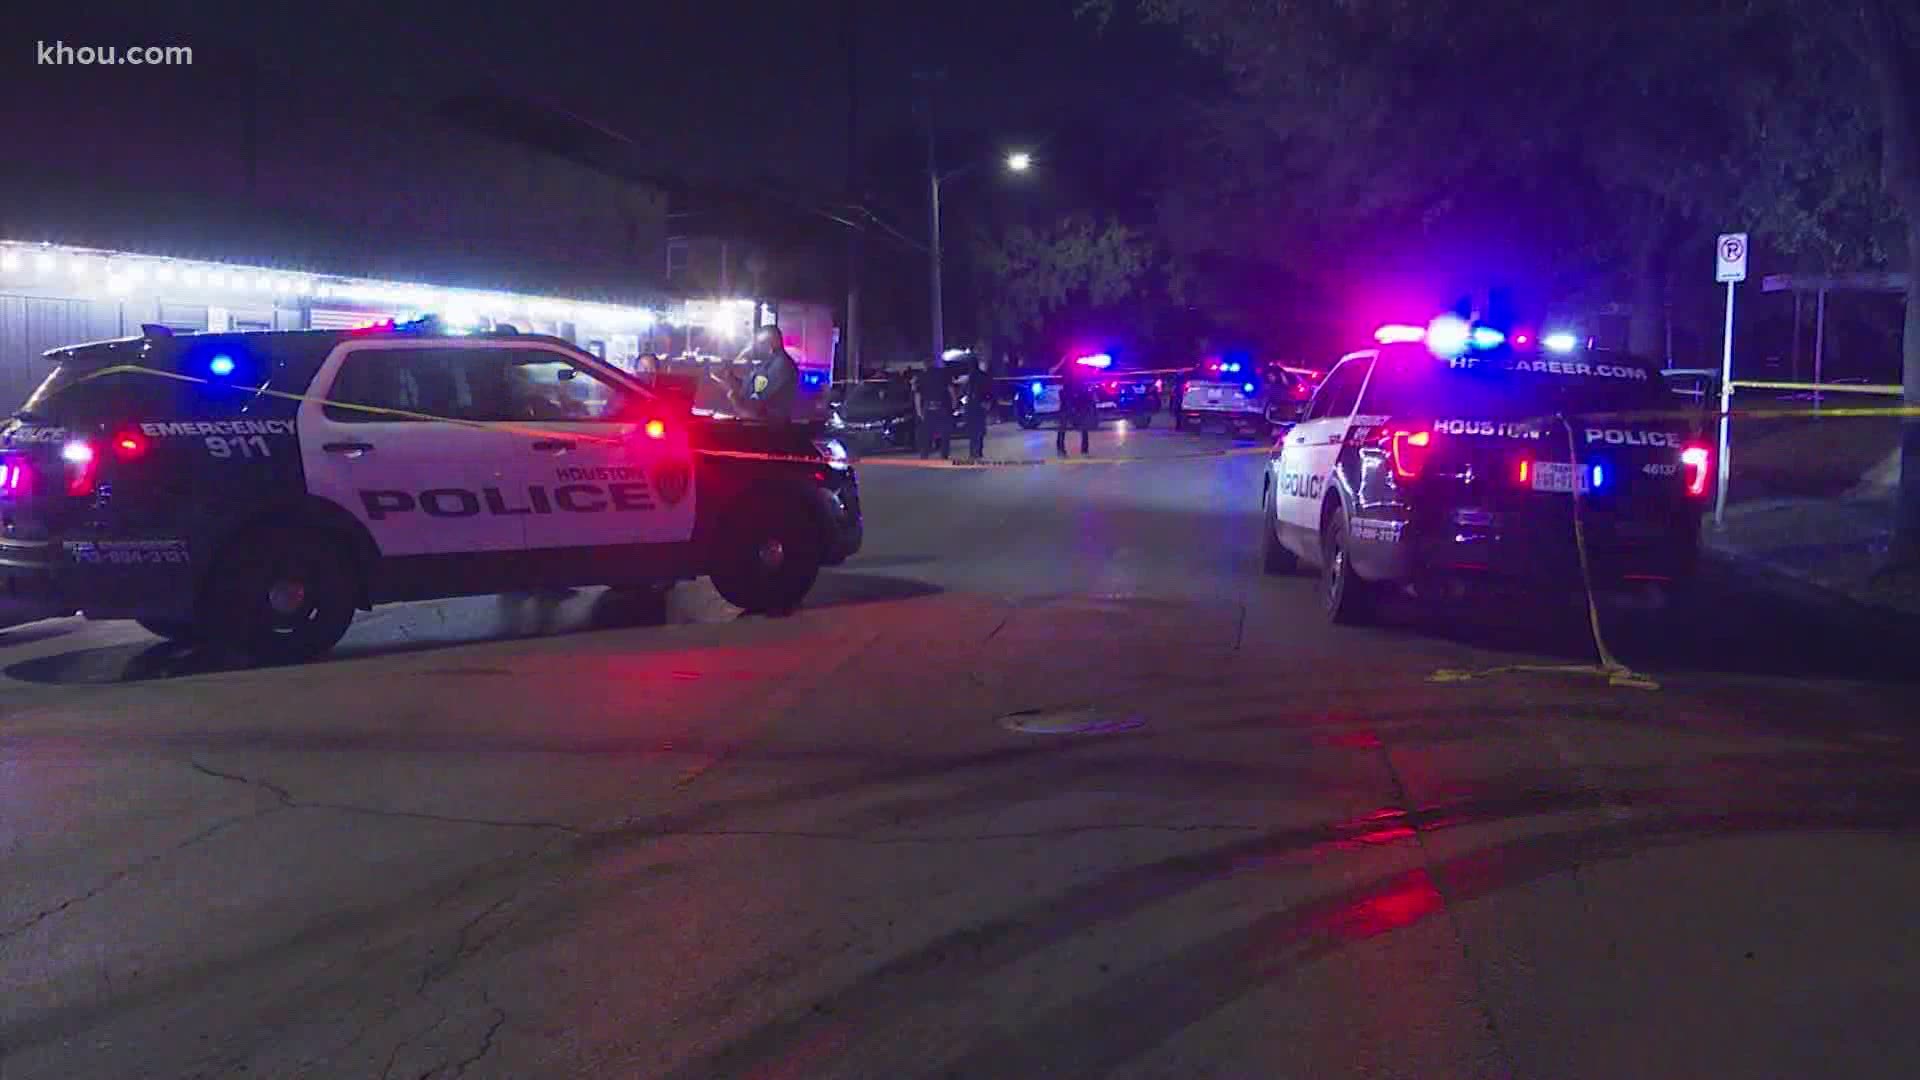 Houston police are investigating a shooting that left one person injured and another in custody at a nightclub in Third Ward.